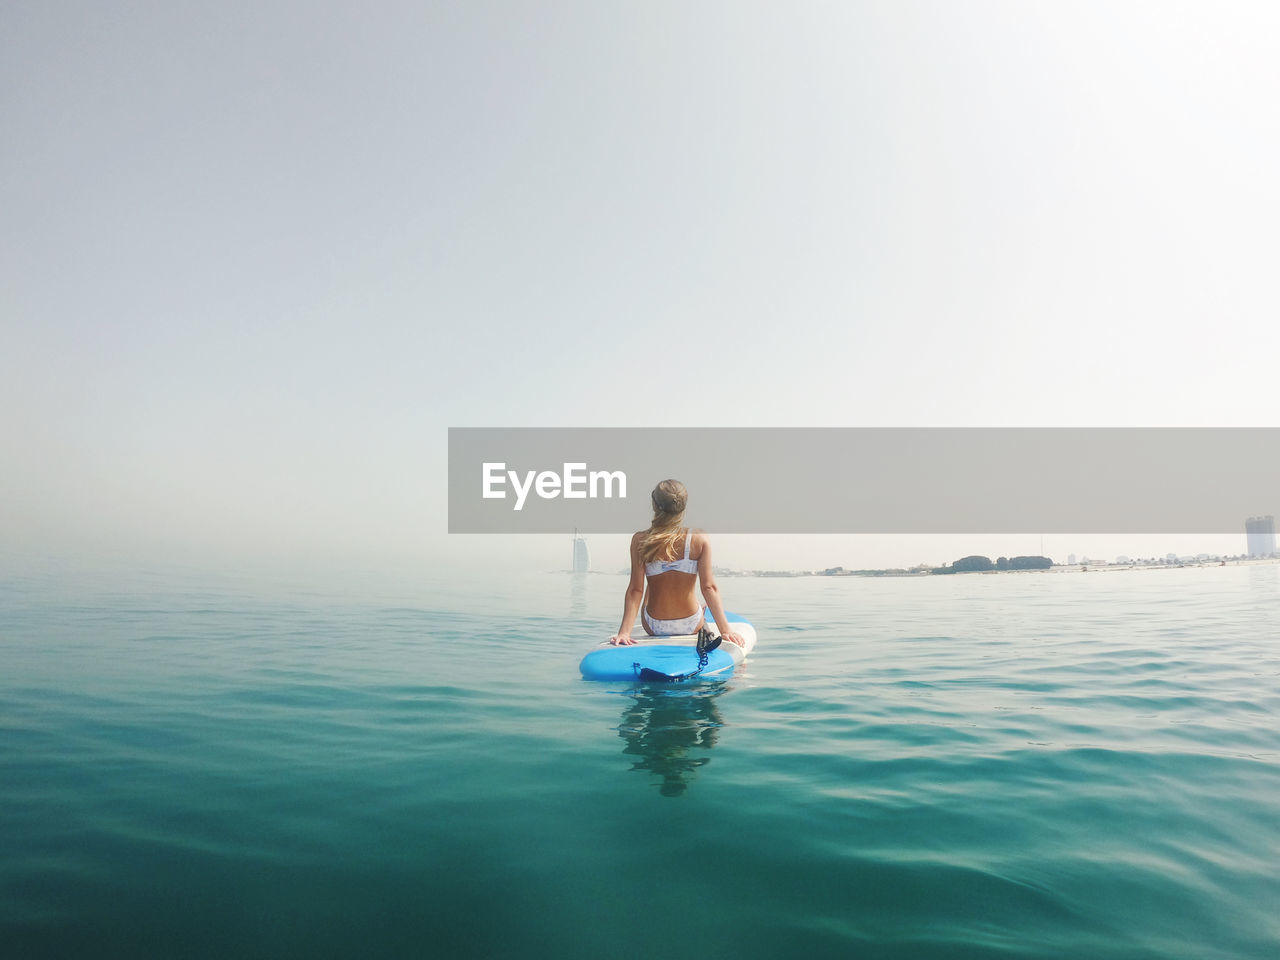 Woman sitting on the paddle board with a view on burj al arab